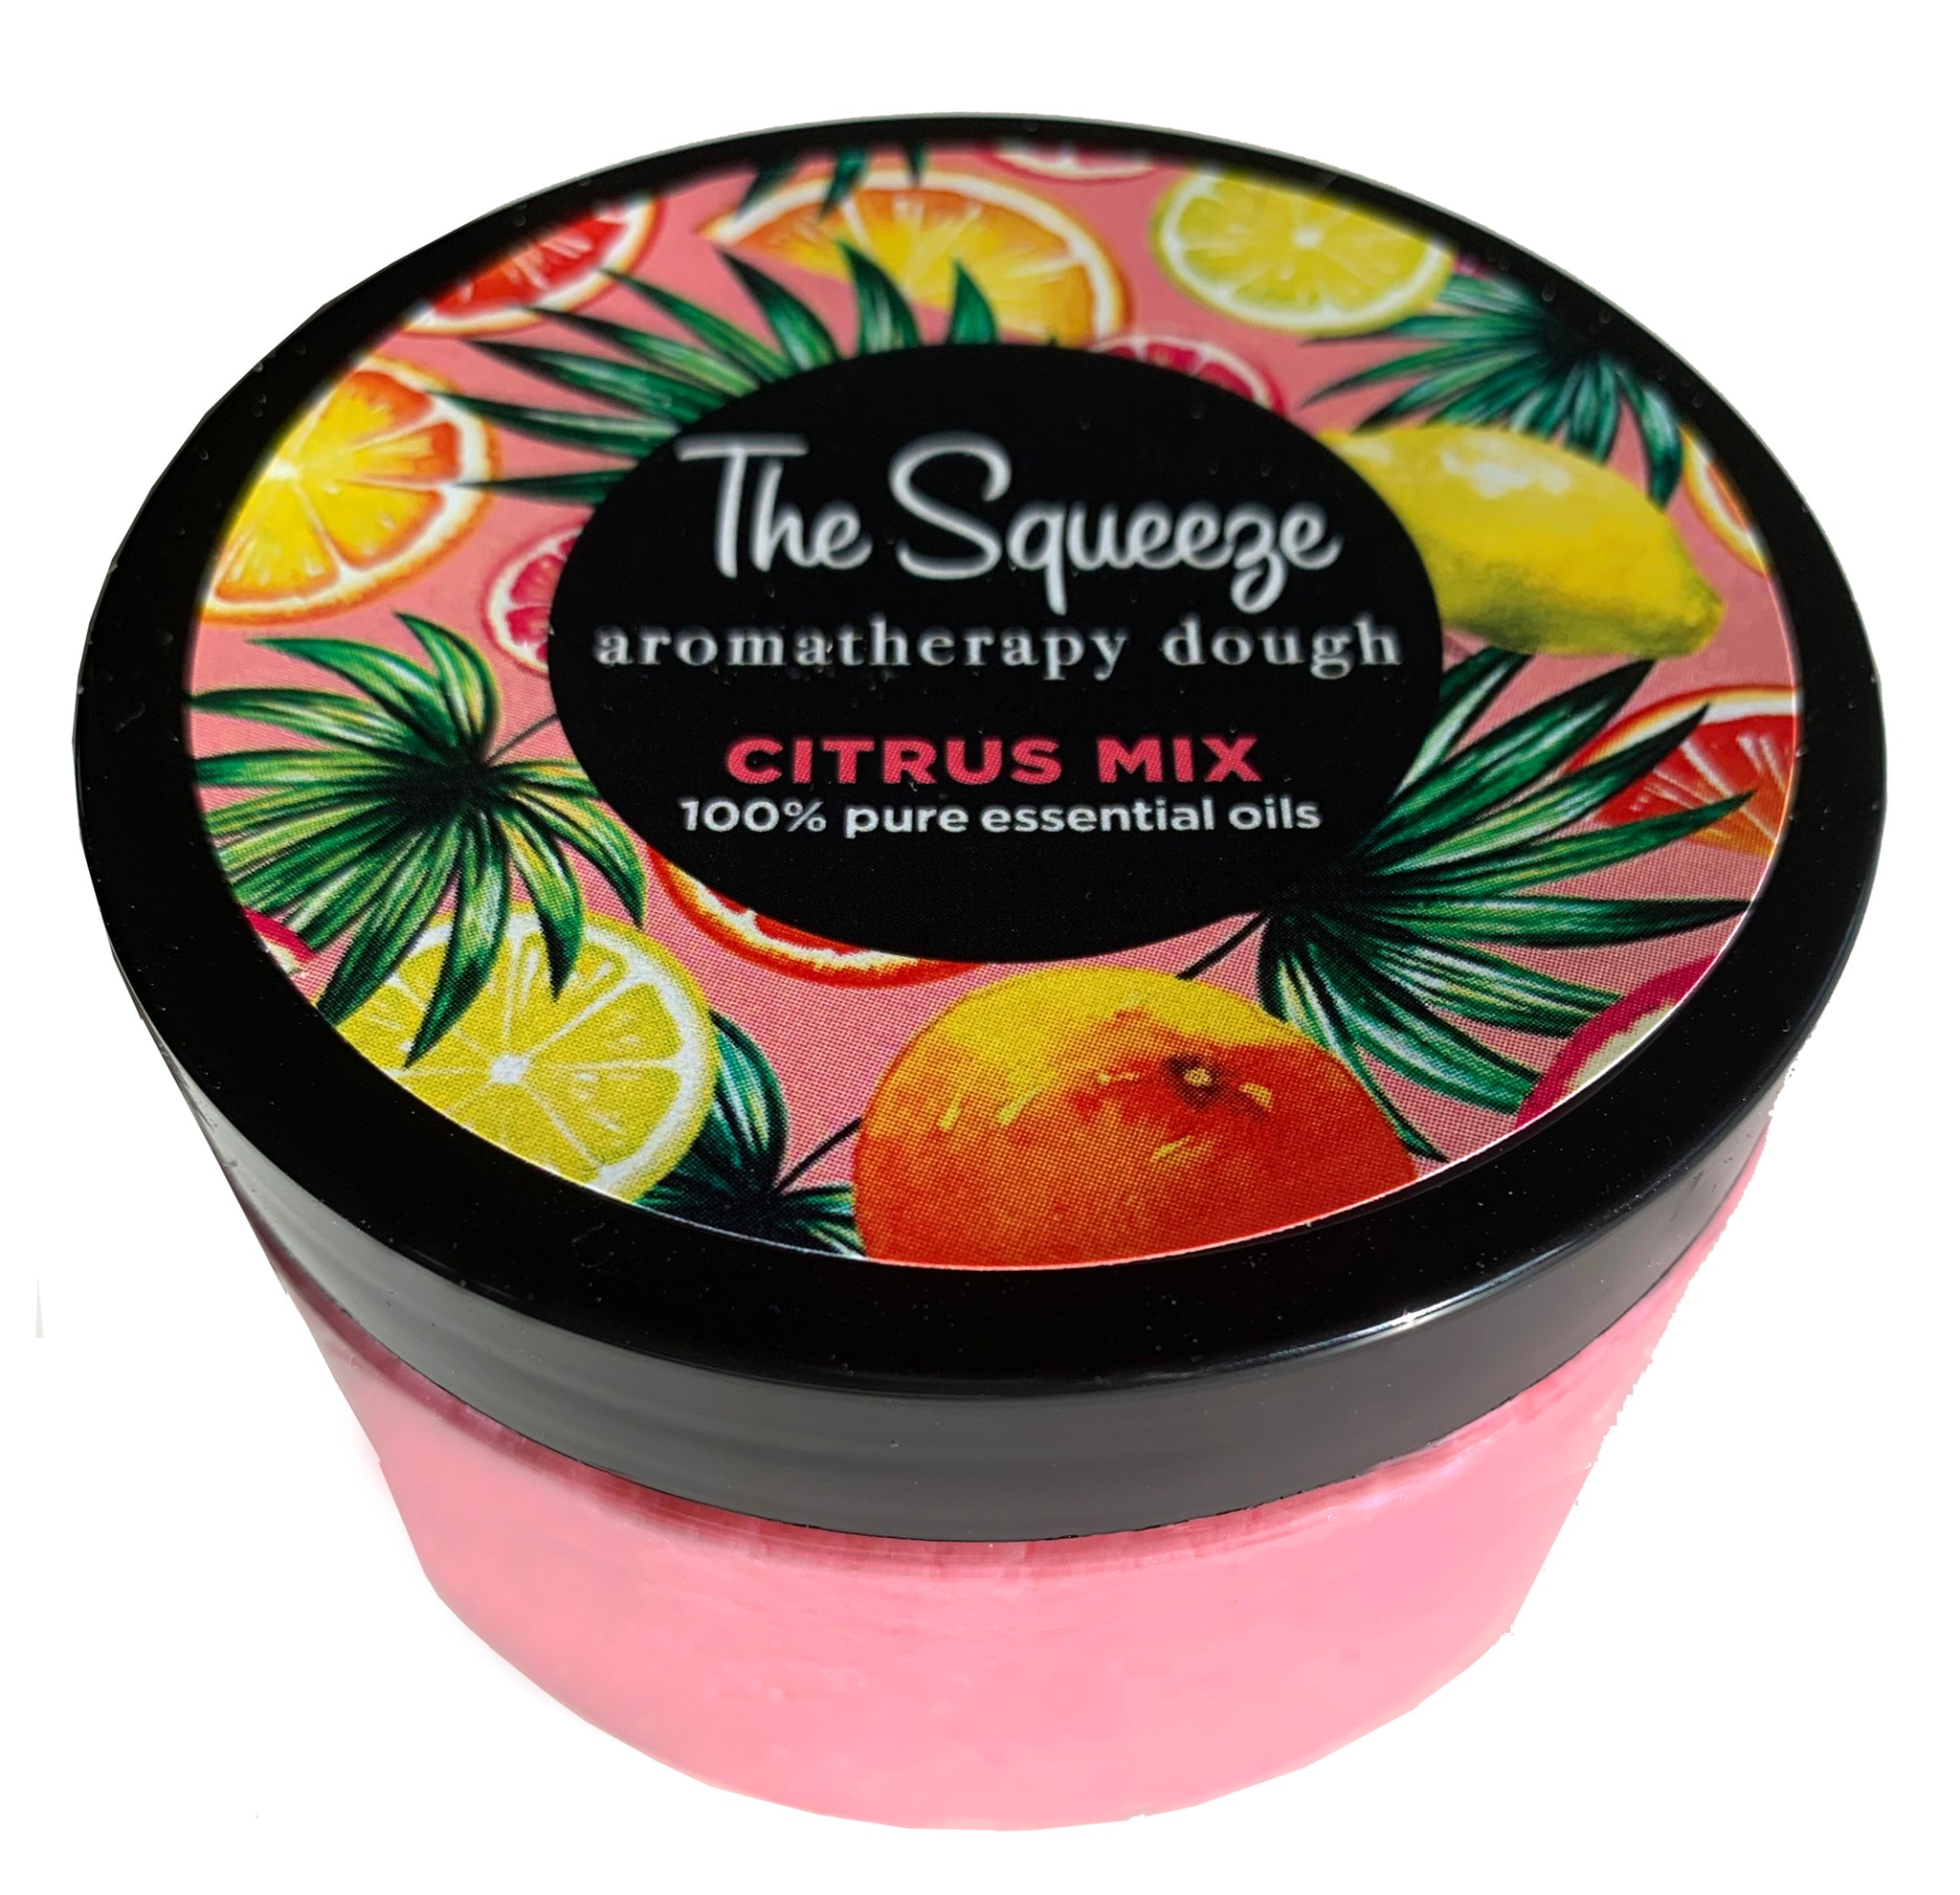 The Squeeze - Therapy Dough Citrus Mix with 100% essential oils for self care, aromatherapy stress ball, stress relief